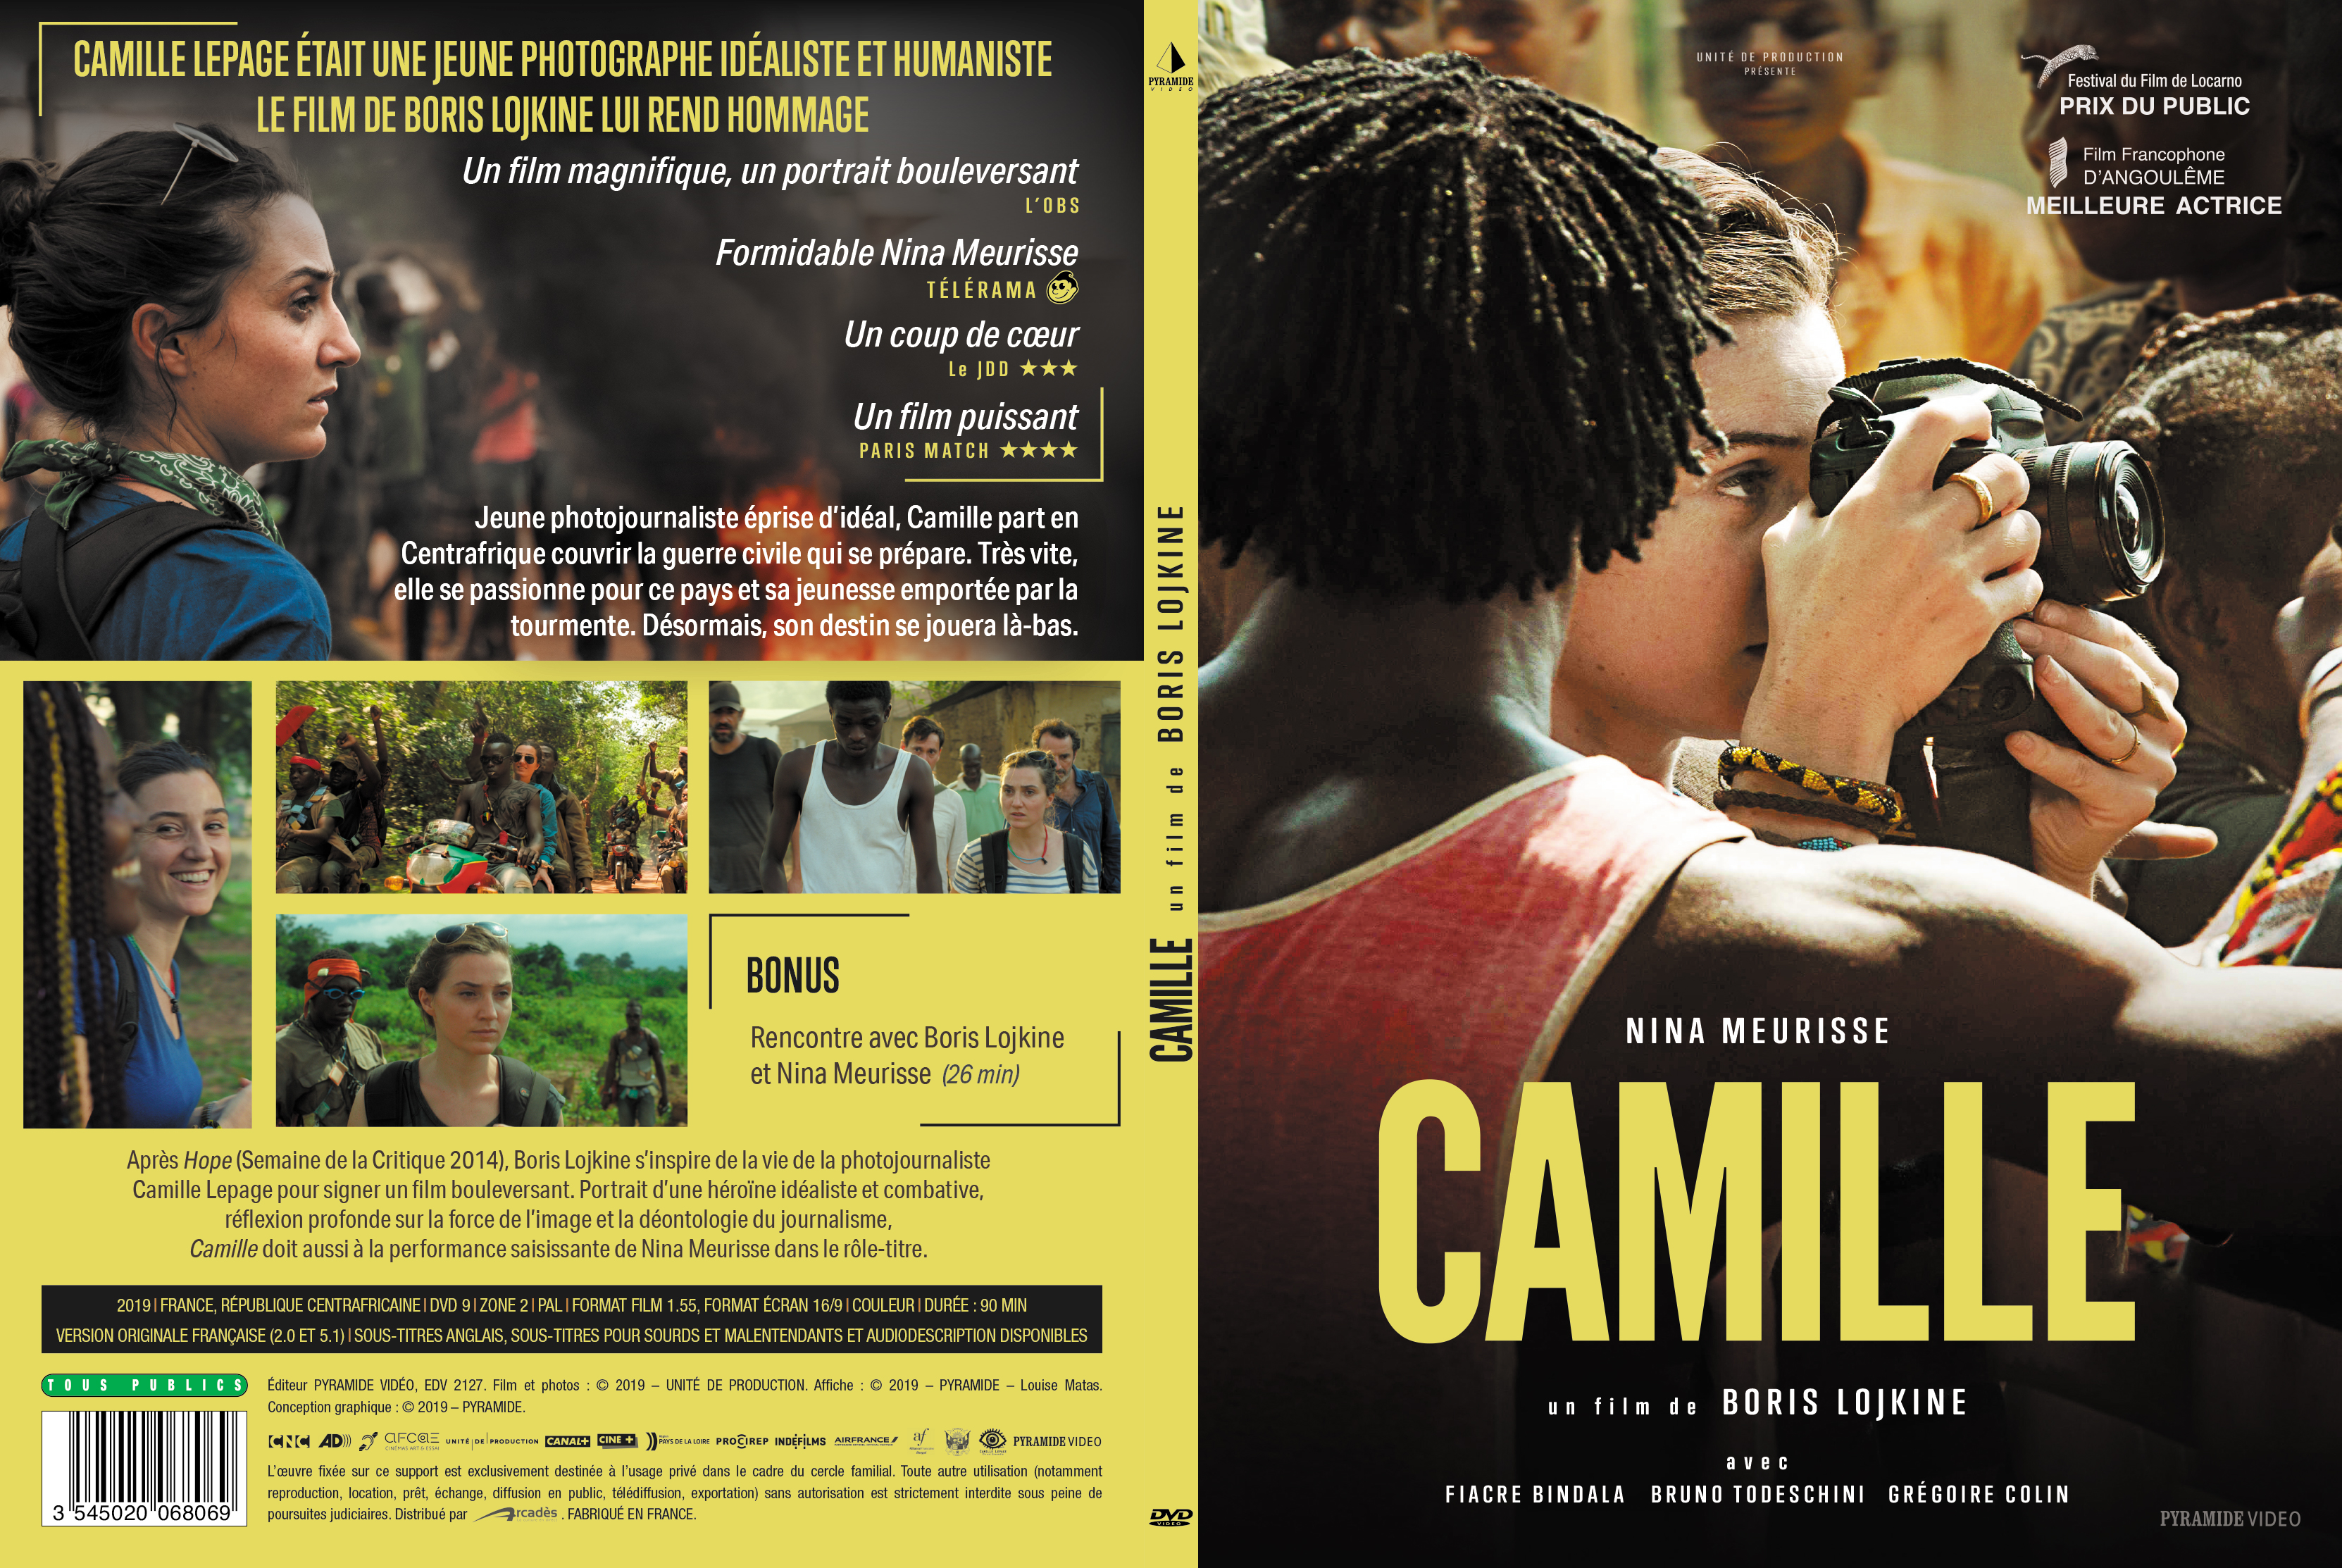 Jaquette DVD Camille